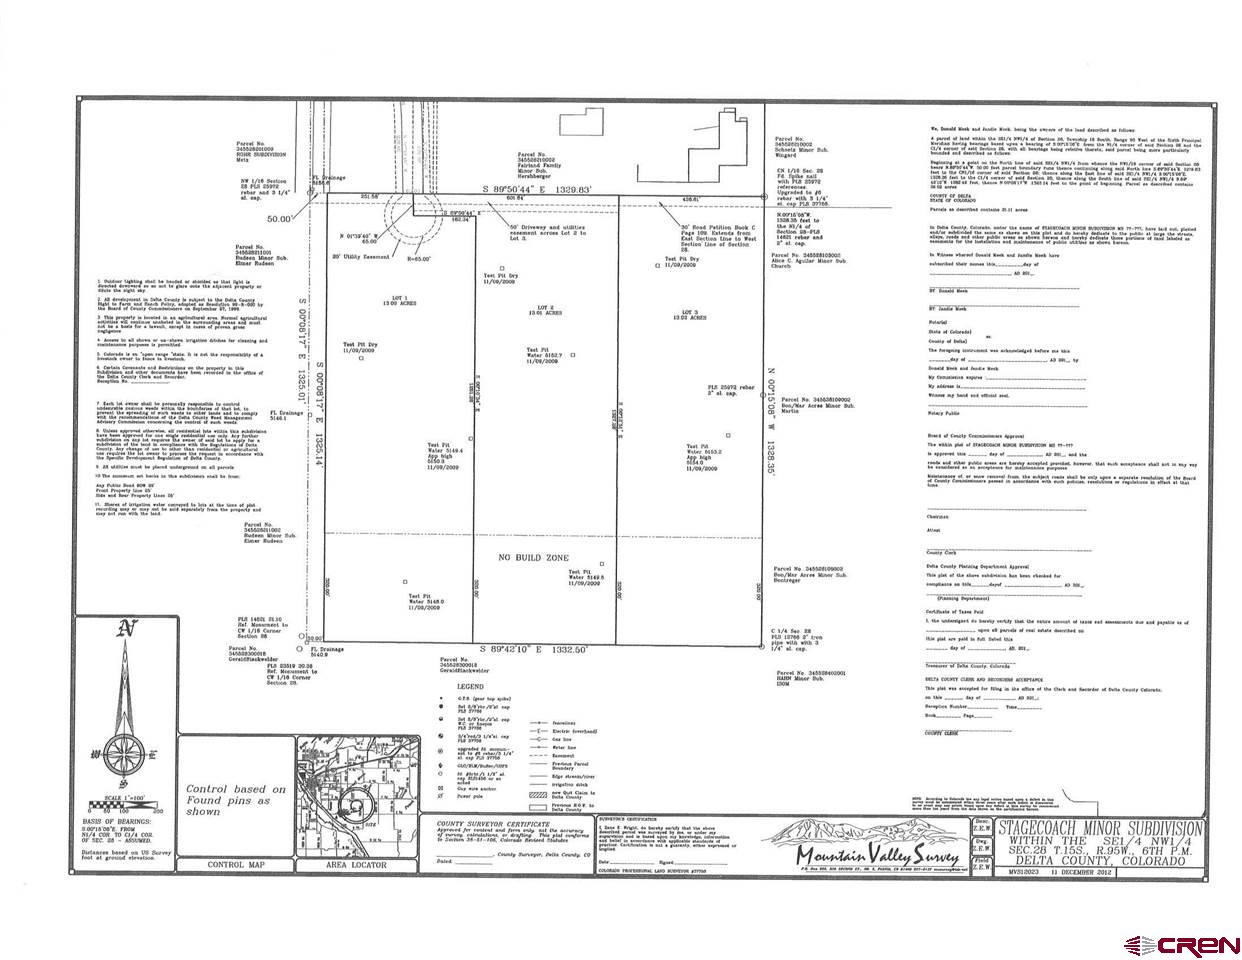 Attention Developers!!! Sellers motivated! This has conditional approval from Delta County.  Stagecoach Minor Subdivision Conditional Approval consisting of three 13 acre lots. Could possibly be subdivided into more lots with County approval. Deeded easement to F Road. Great solar potential, no obstructions. Mountain views of the West Elk Mountains. Close to Delta High School, great location!